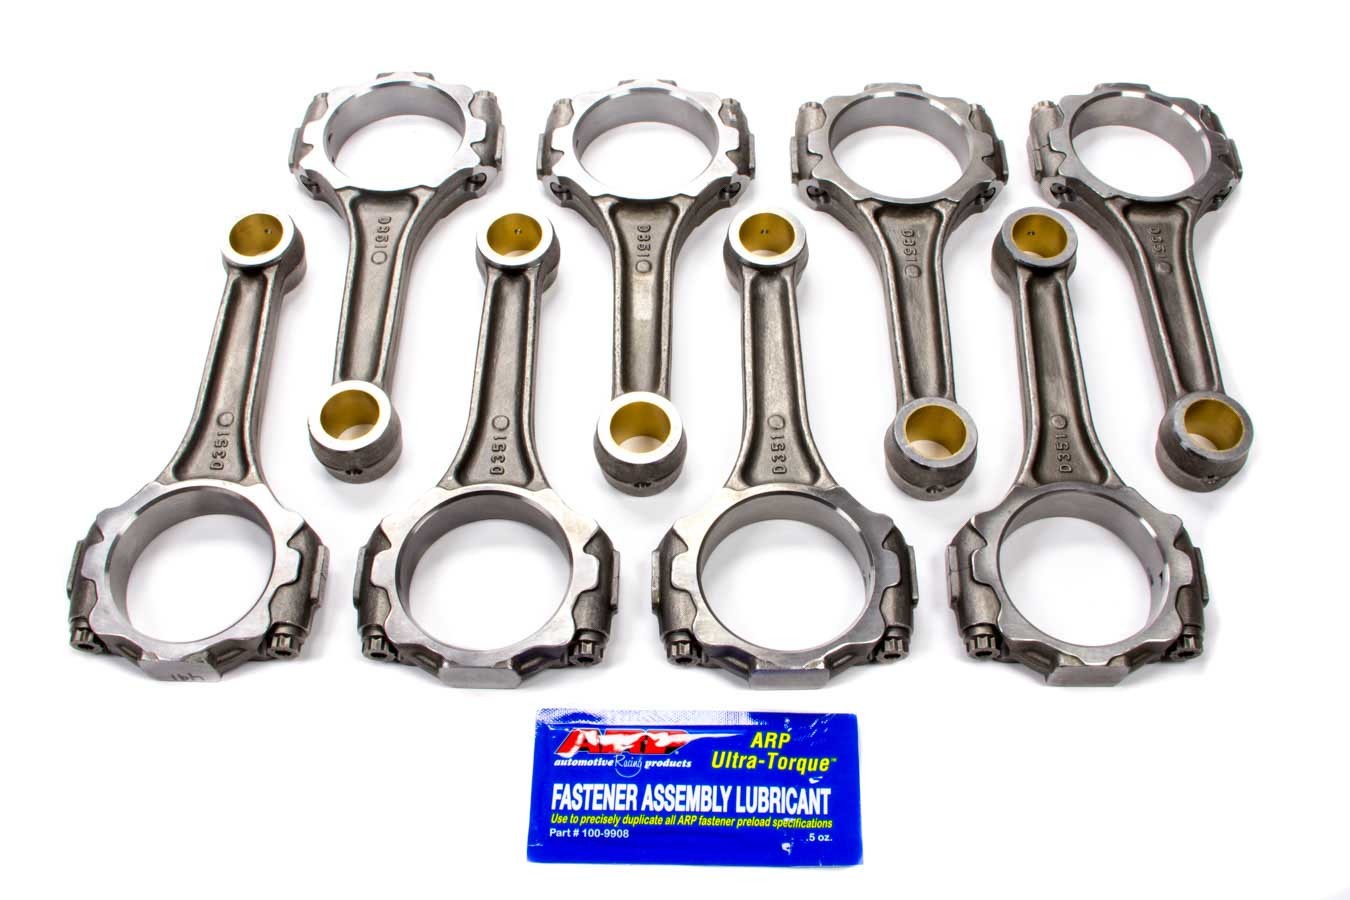 Scat 2-ICR5955-912 - Connecting Rod, Pro Stock, I Beam, 5.955 in Long, Bushed, 3/8 in Cap Screws, ARP8740, Forged Steel, Small Block Ford, Set of 8